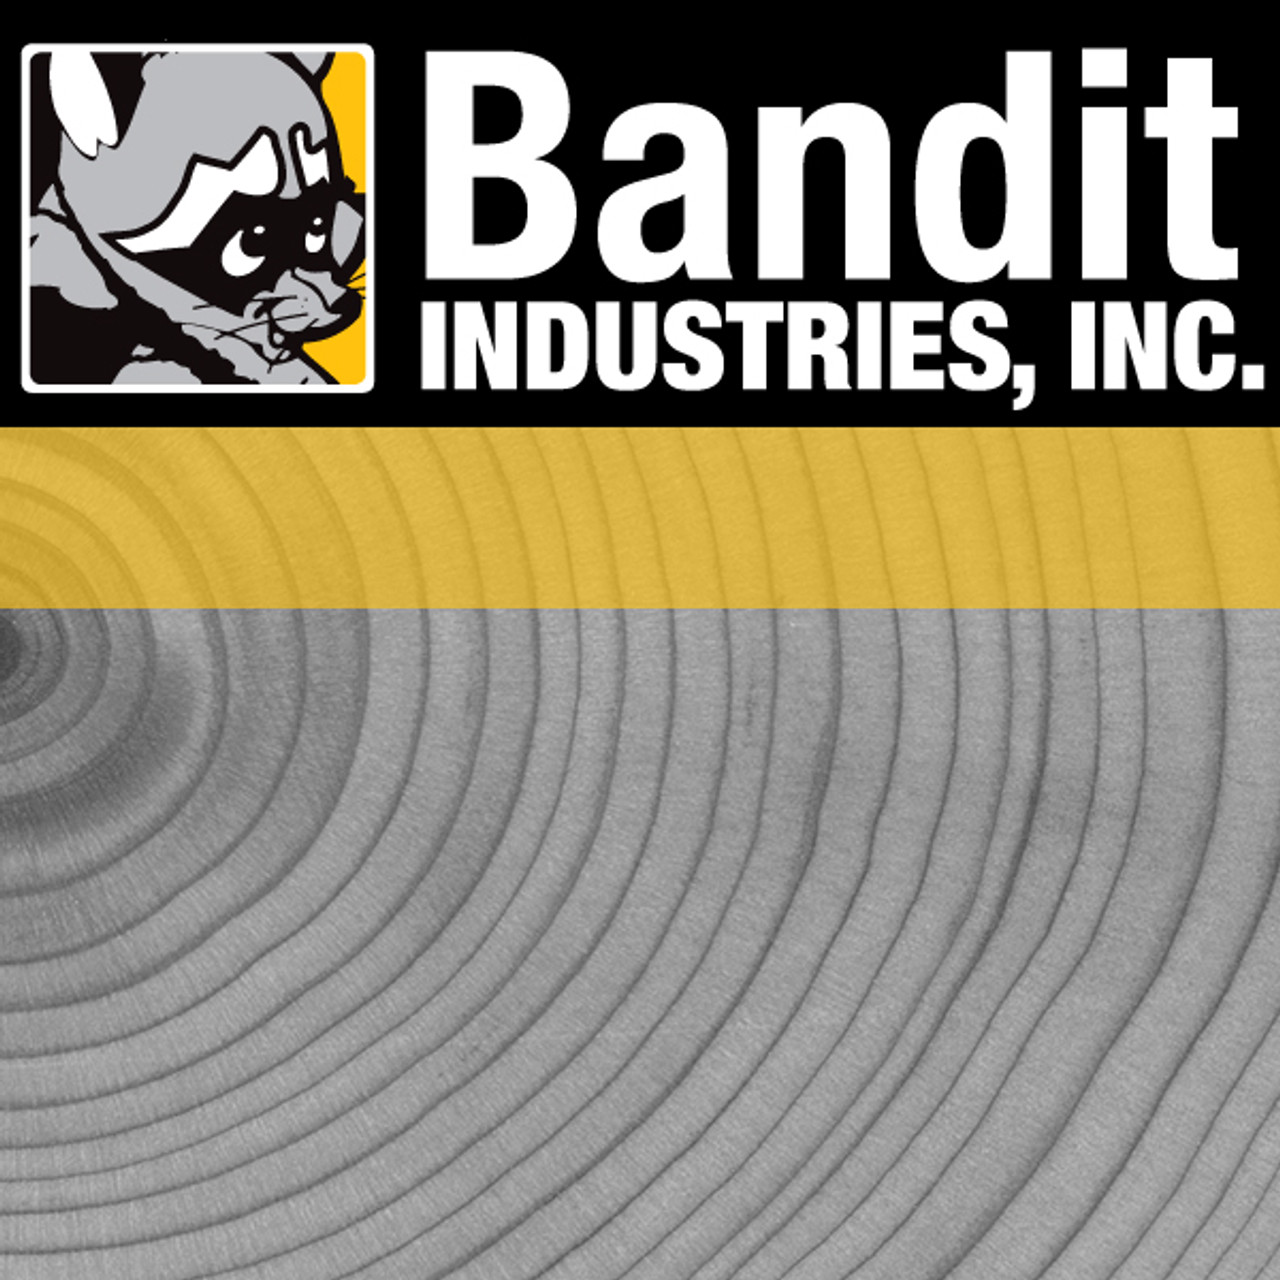 996-2000-40: BANDIT OPTIONAL SWING OUT CHIP CURTAIN 3200TW